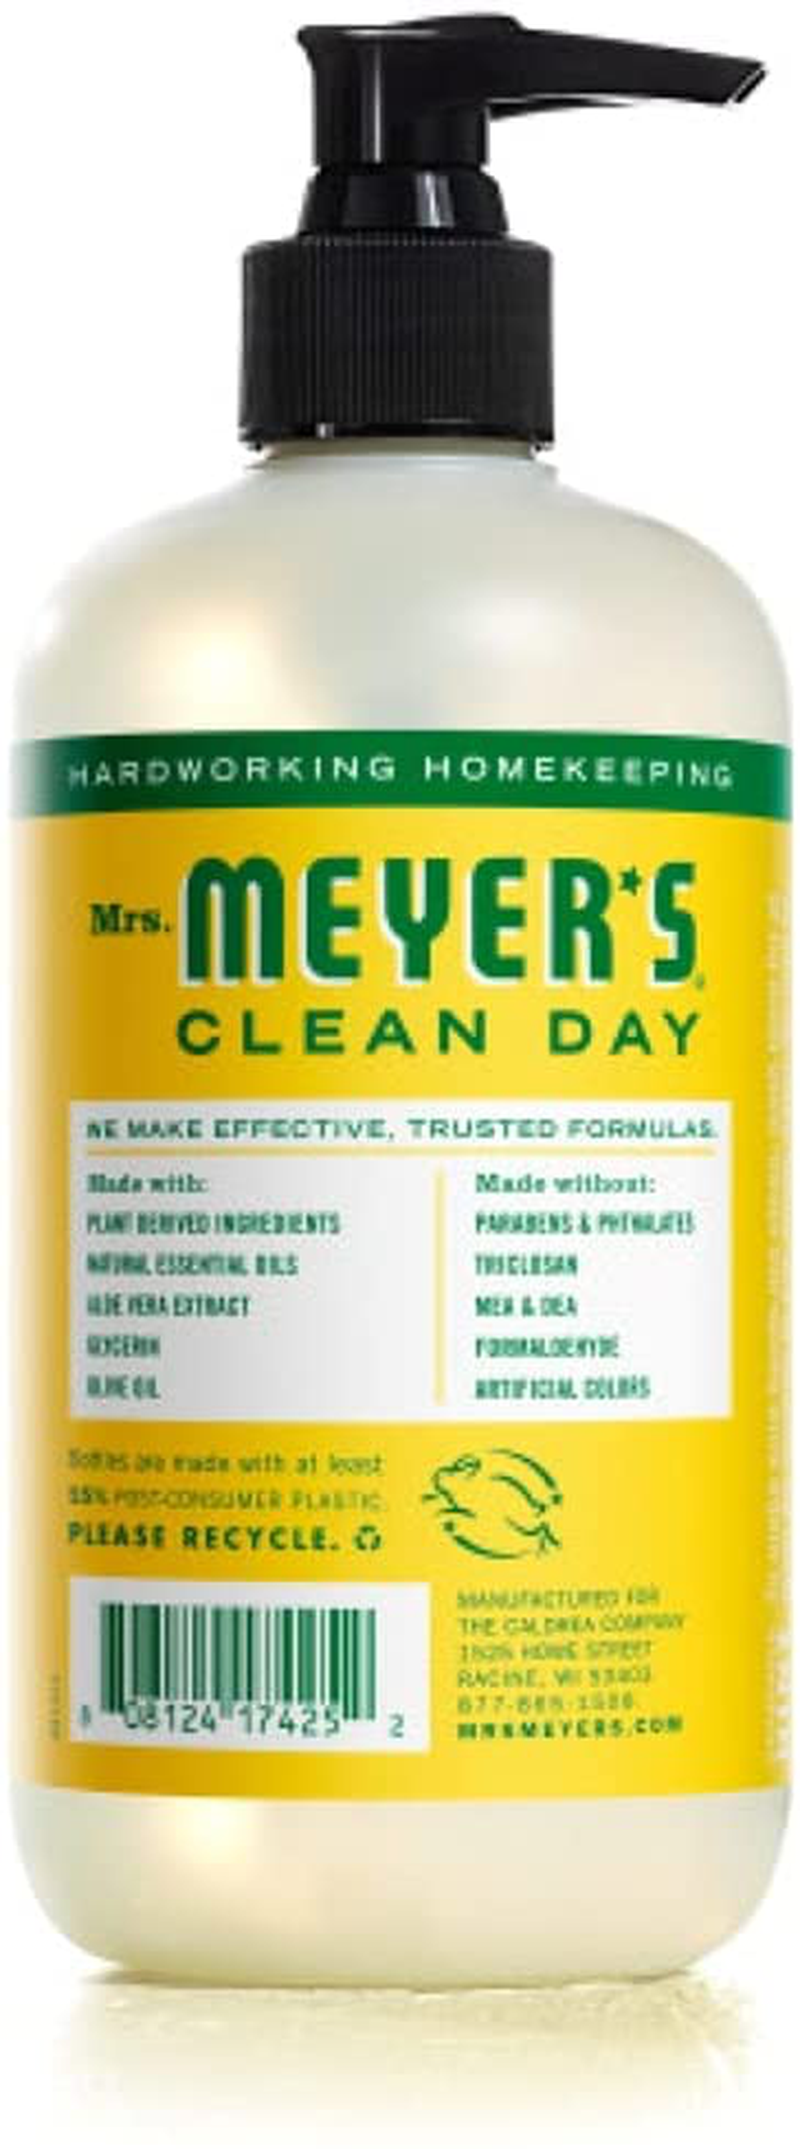 Mrs. Meyer's Clean Day Liquid Hand Soap, Cruelty Free and Biodegradable Hand Wash Formula Made with Essential Oils, Honeysuckle Scent, 12.5 oz - Pack of 3